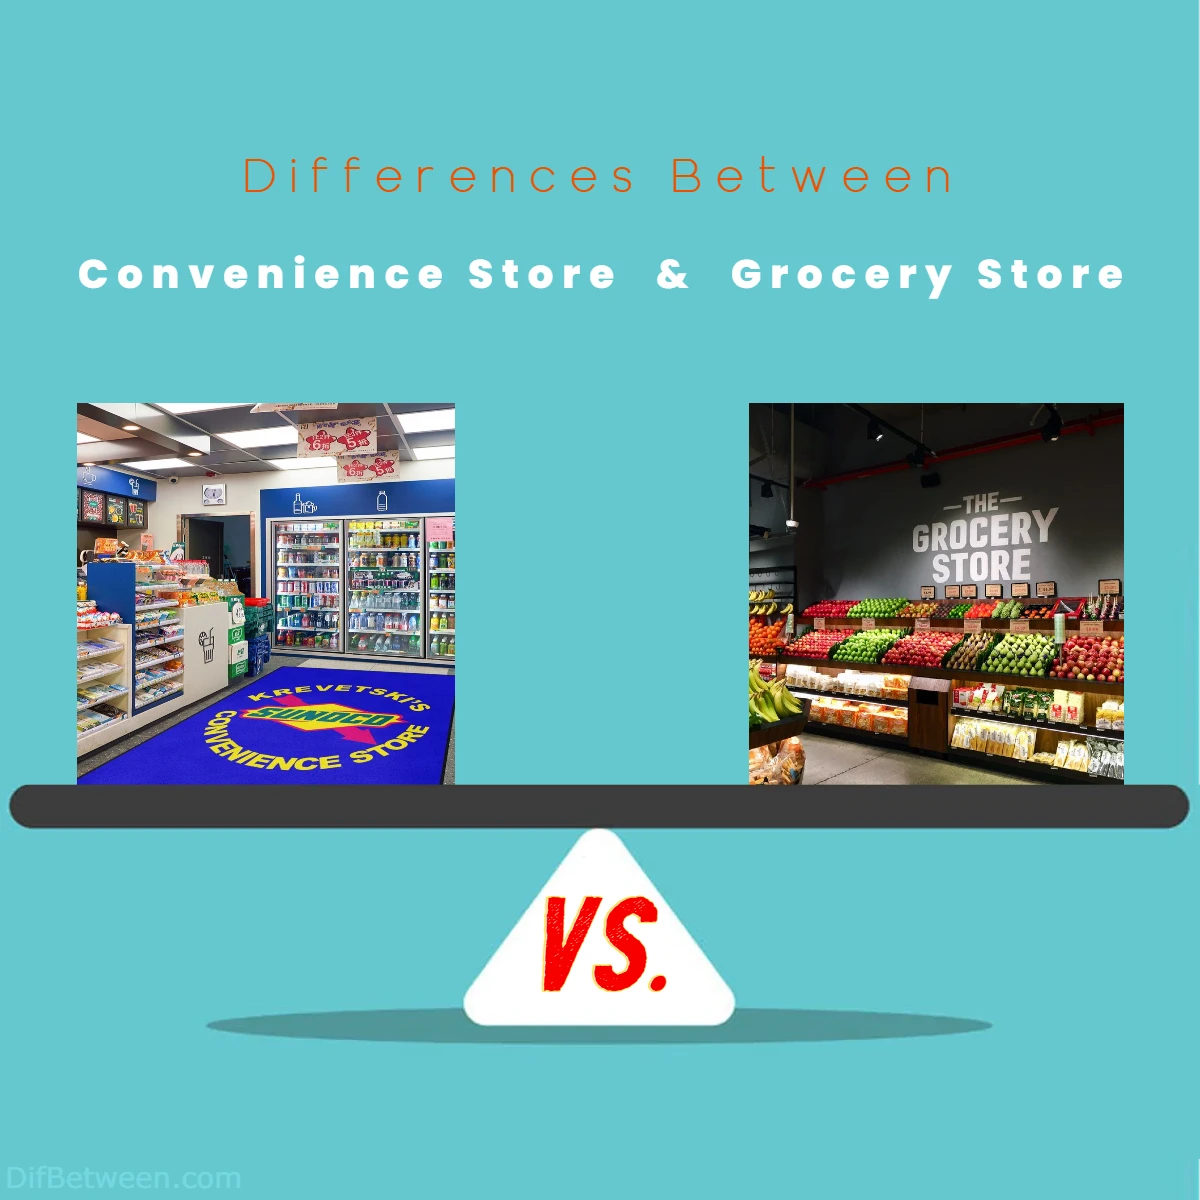 Differences Between Convenience Store vs Grocery Store